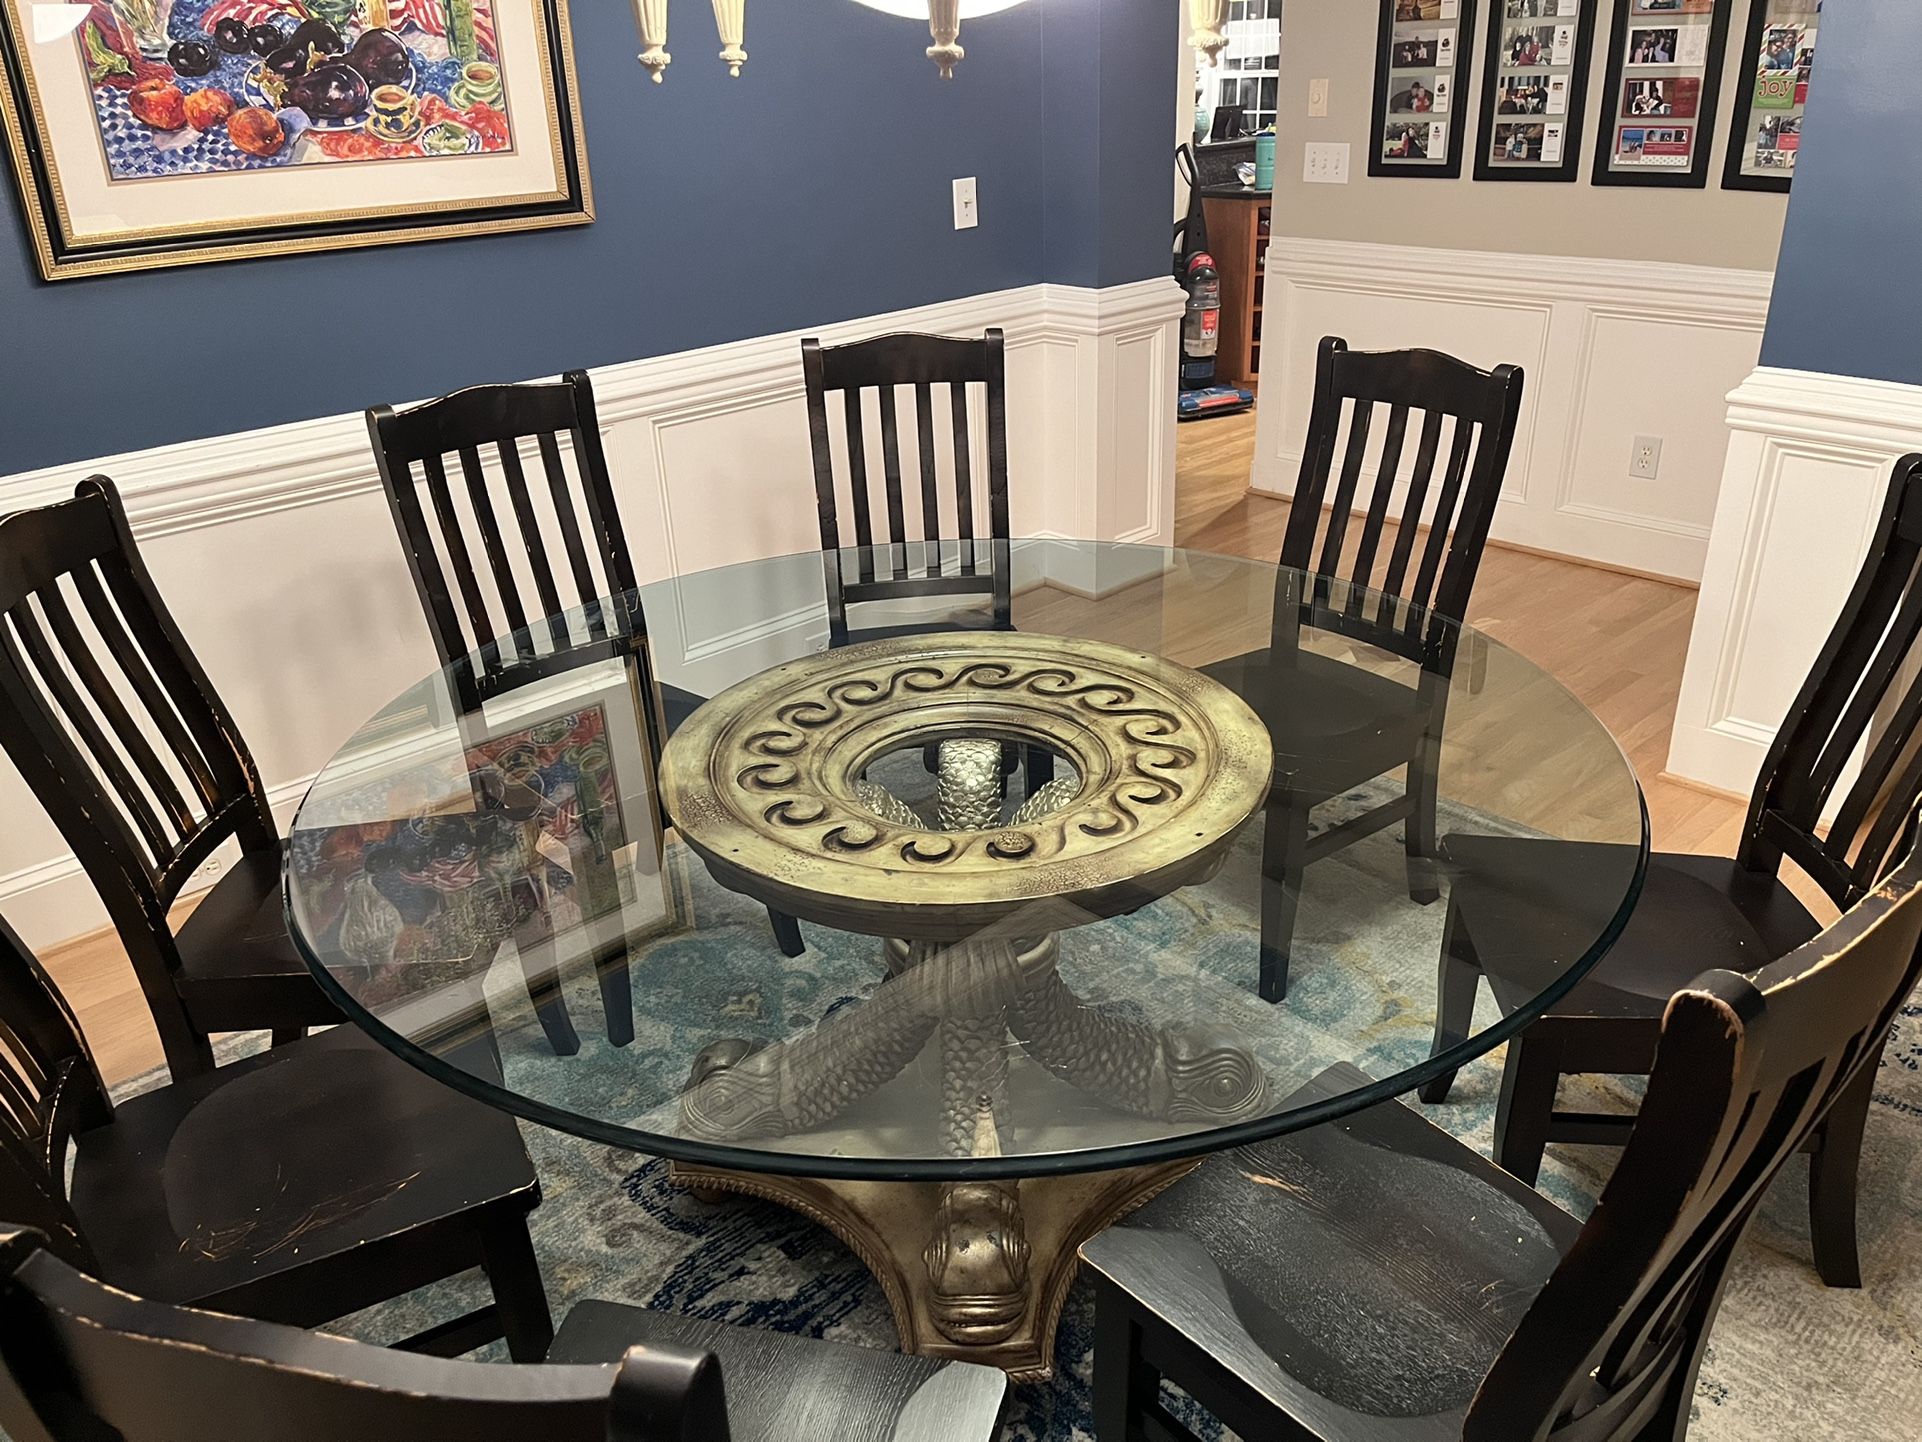 64 Inch Round Glass Table